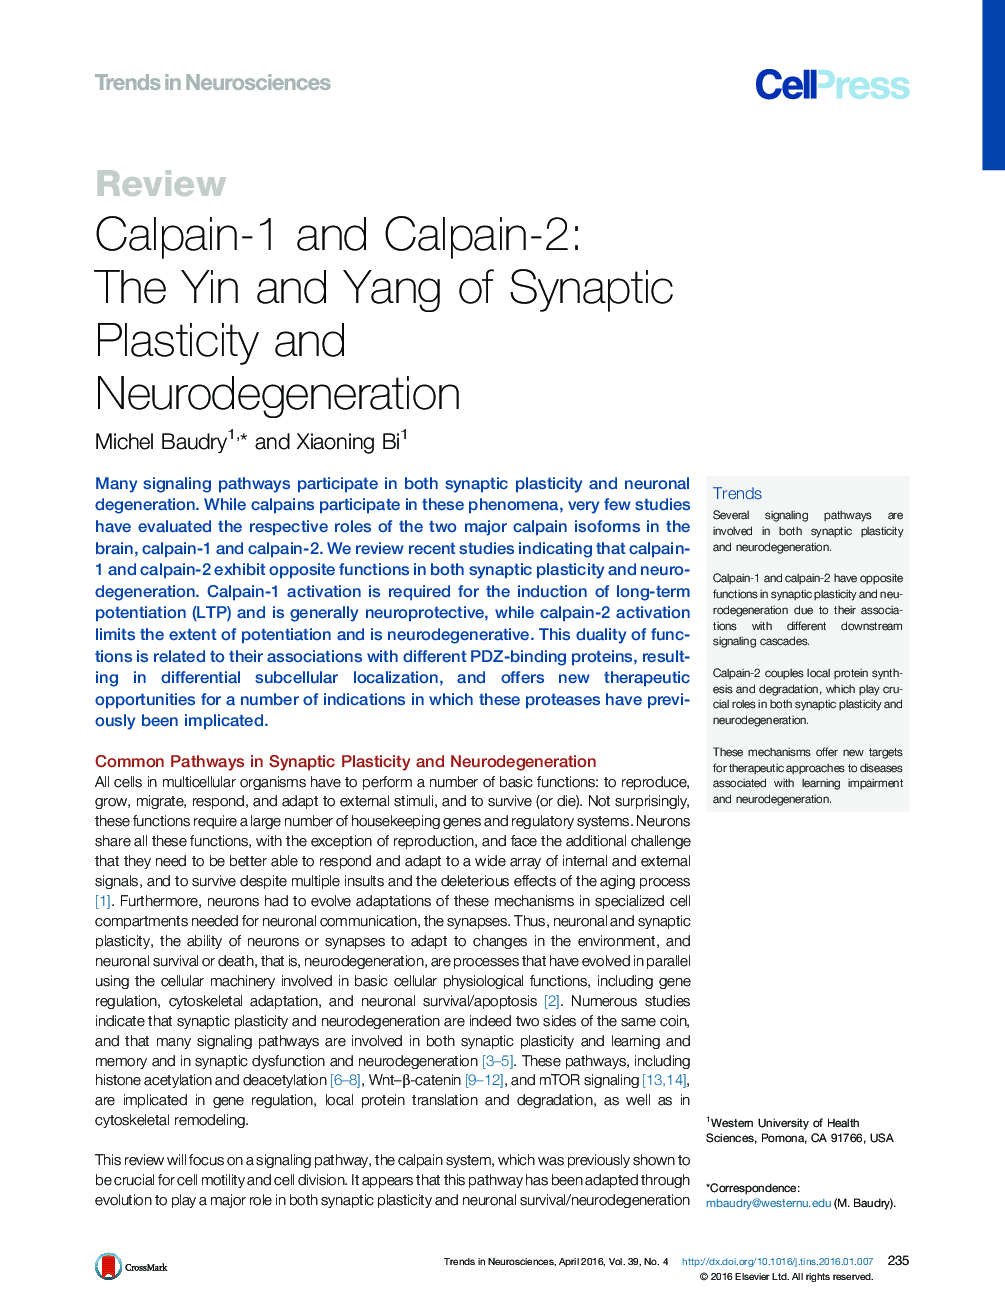 Calpain-1 and Calpain-2: The Yin and Yang of Synaptic Plasticity and Neurodegeneration